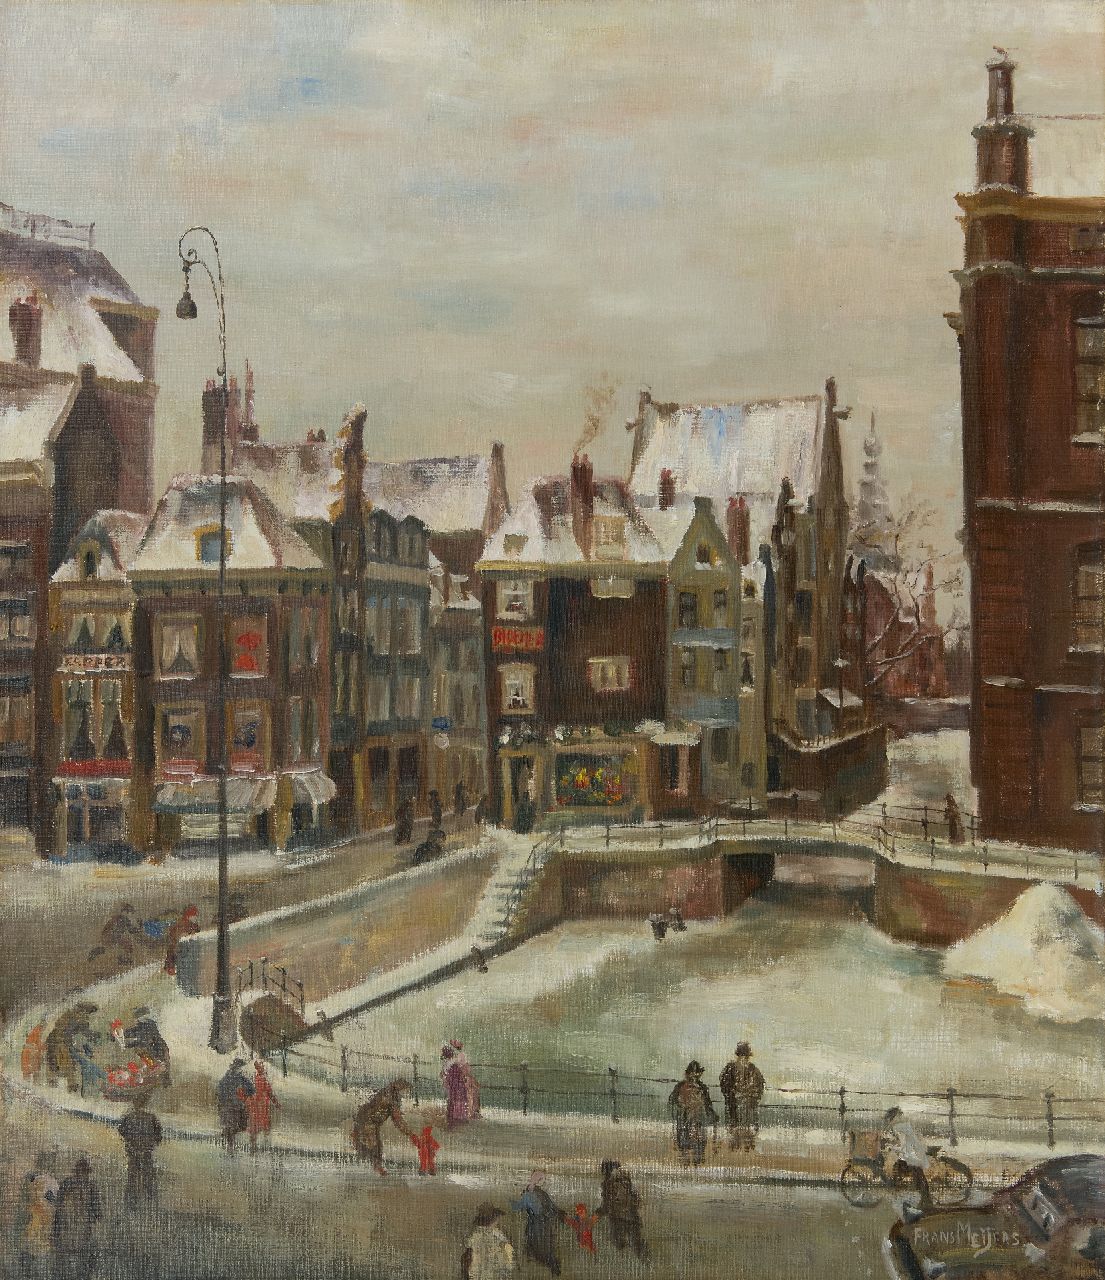 Meijers F.  | Frans Meijers | Paintings offered for sale | A view of  the Rokin in Amsterdam from the Arti building, oil on canvas 70.1 x 60.1 cm, signed l.r.